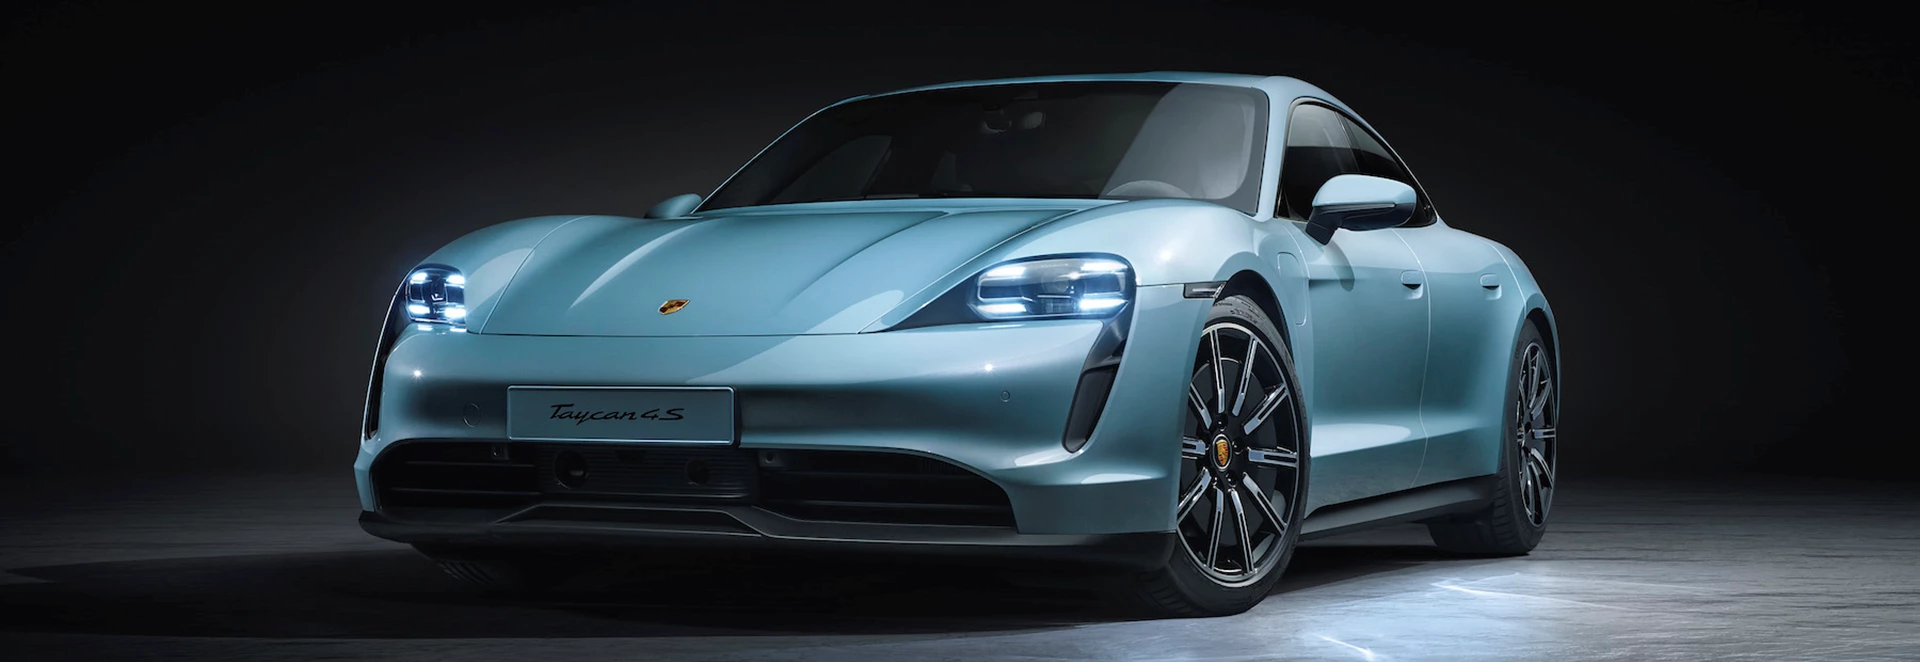 Porsche expands electric Taycan line-up with more affordable 4S